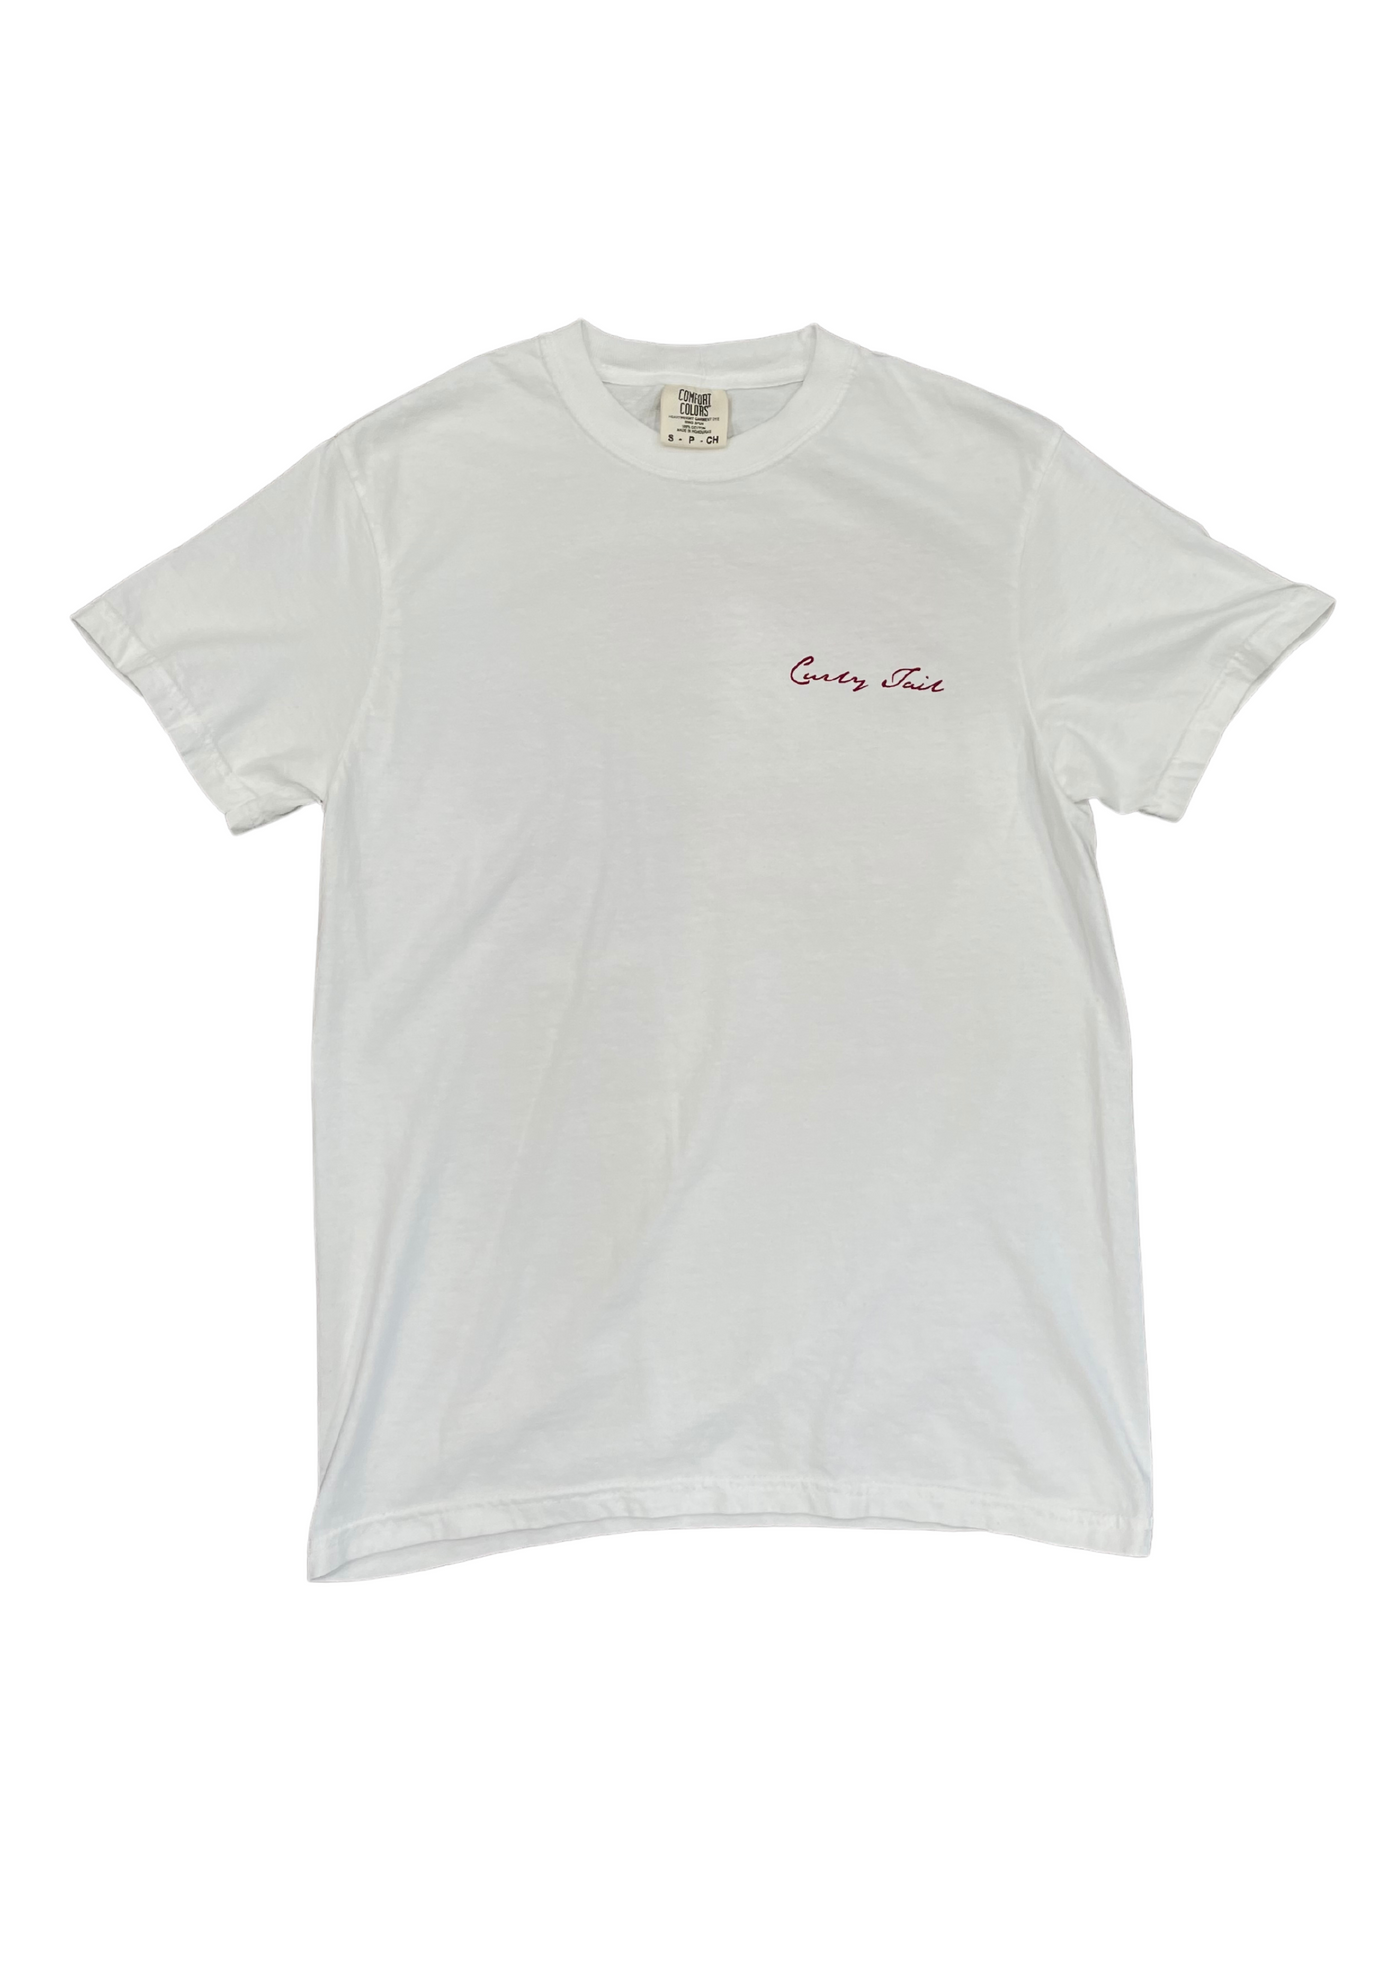 'Home of Curly Tail' T-Shirt